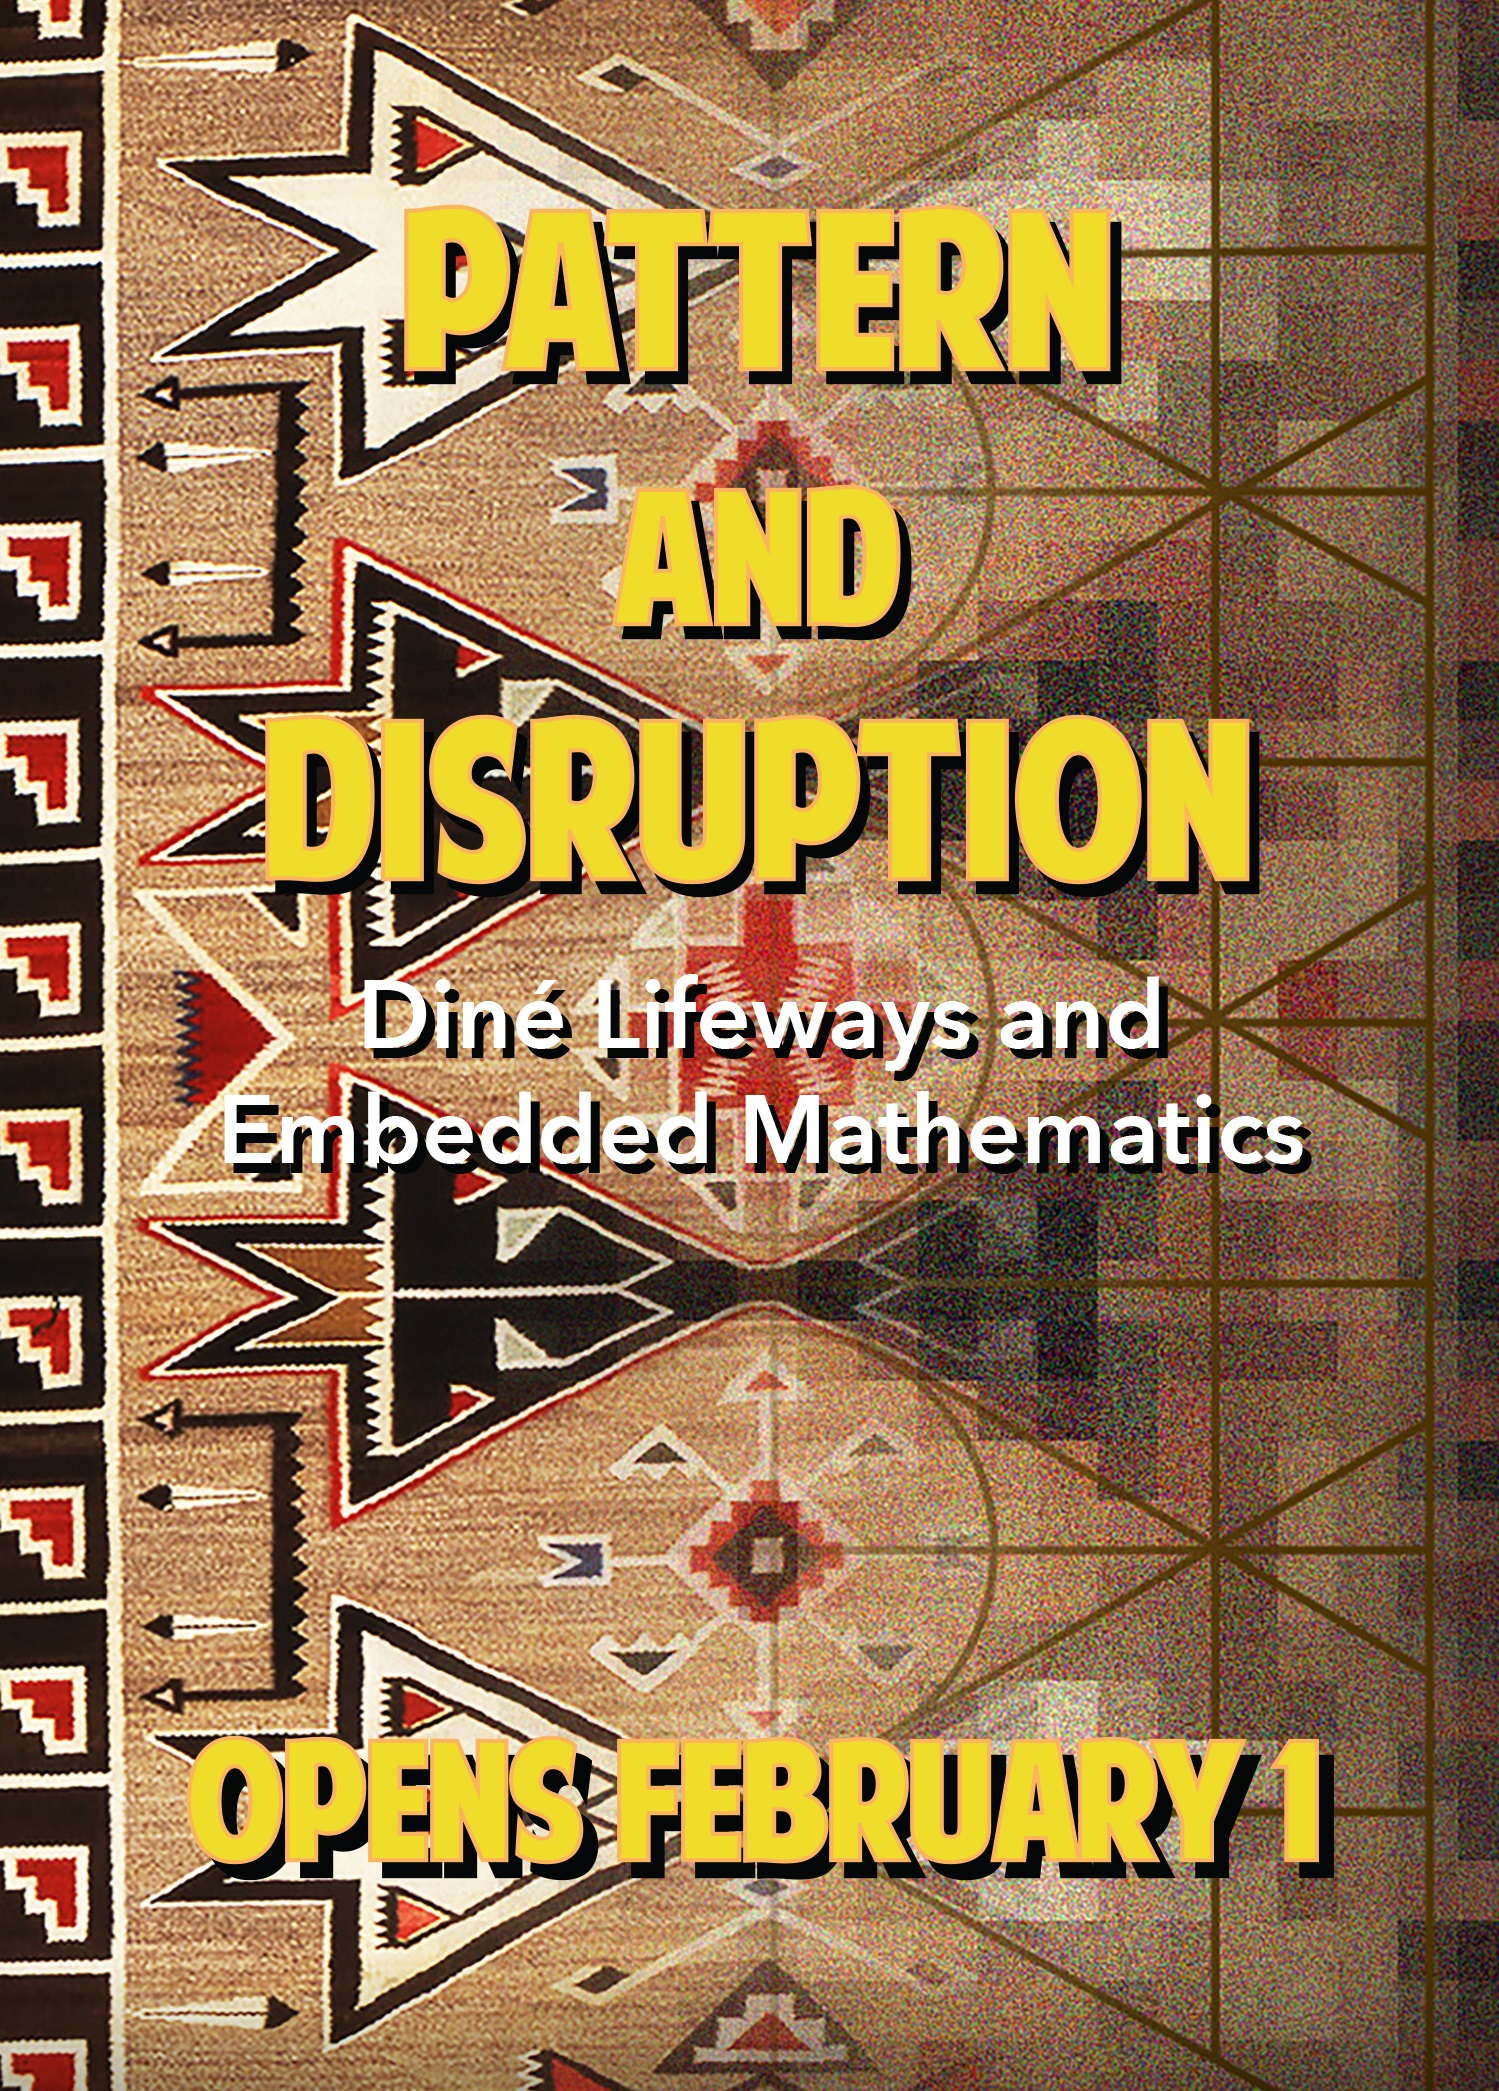 Pattern and Disruption flier